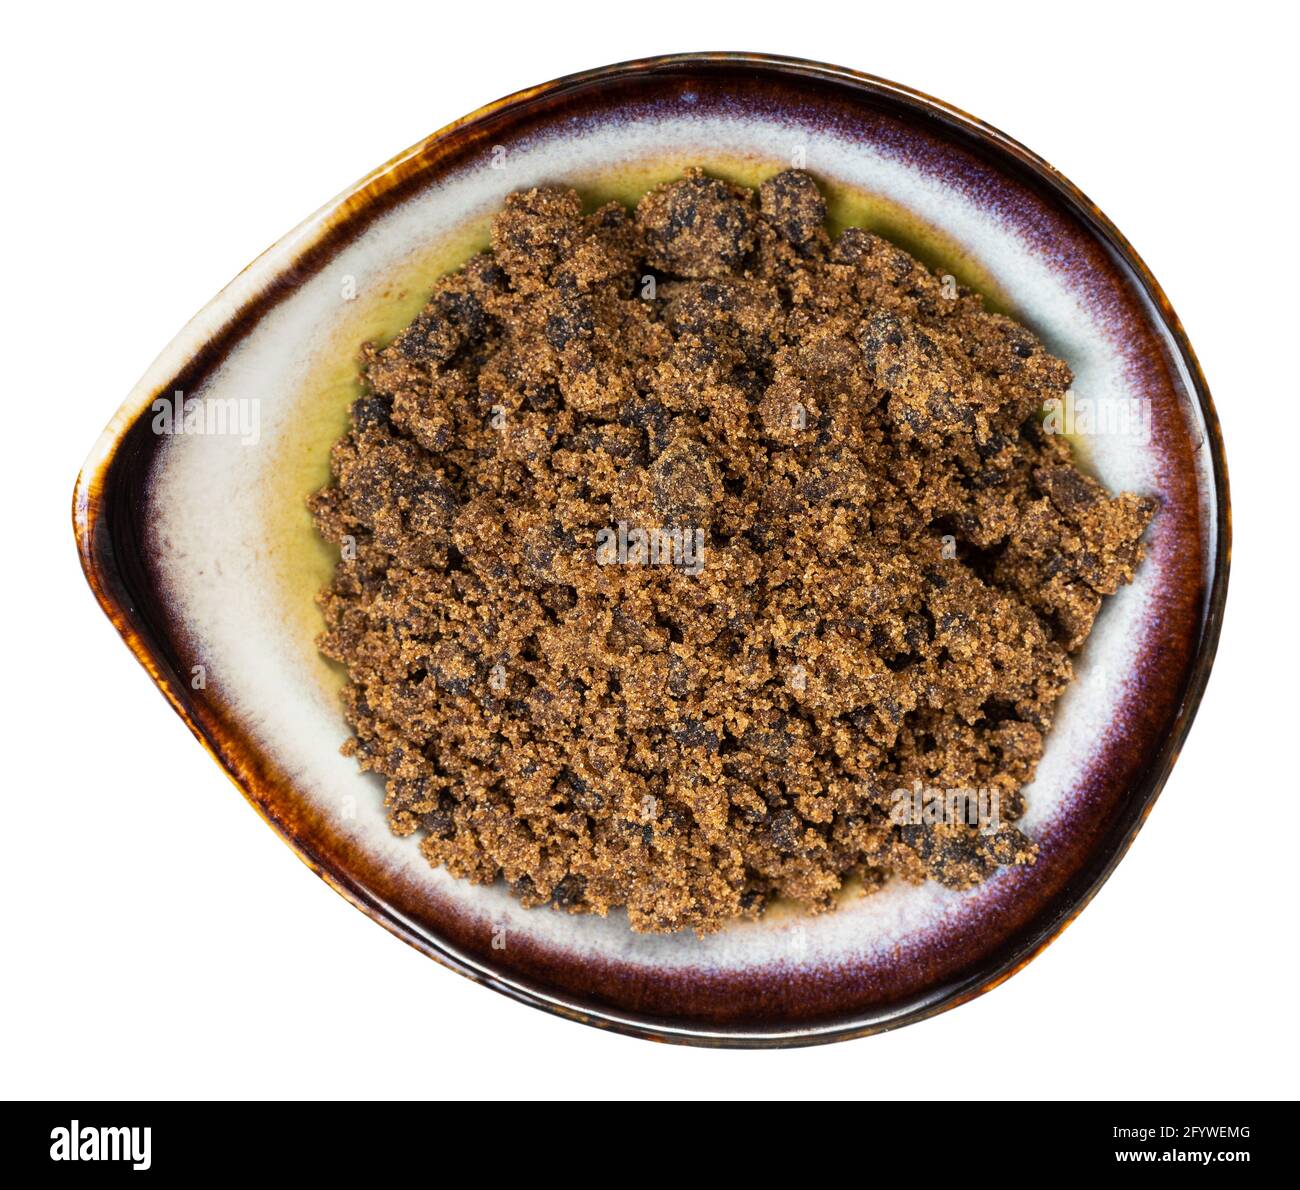 top view of muscovado dark brown cane sugar in ceramic bowl isolated on white background Stock Photo